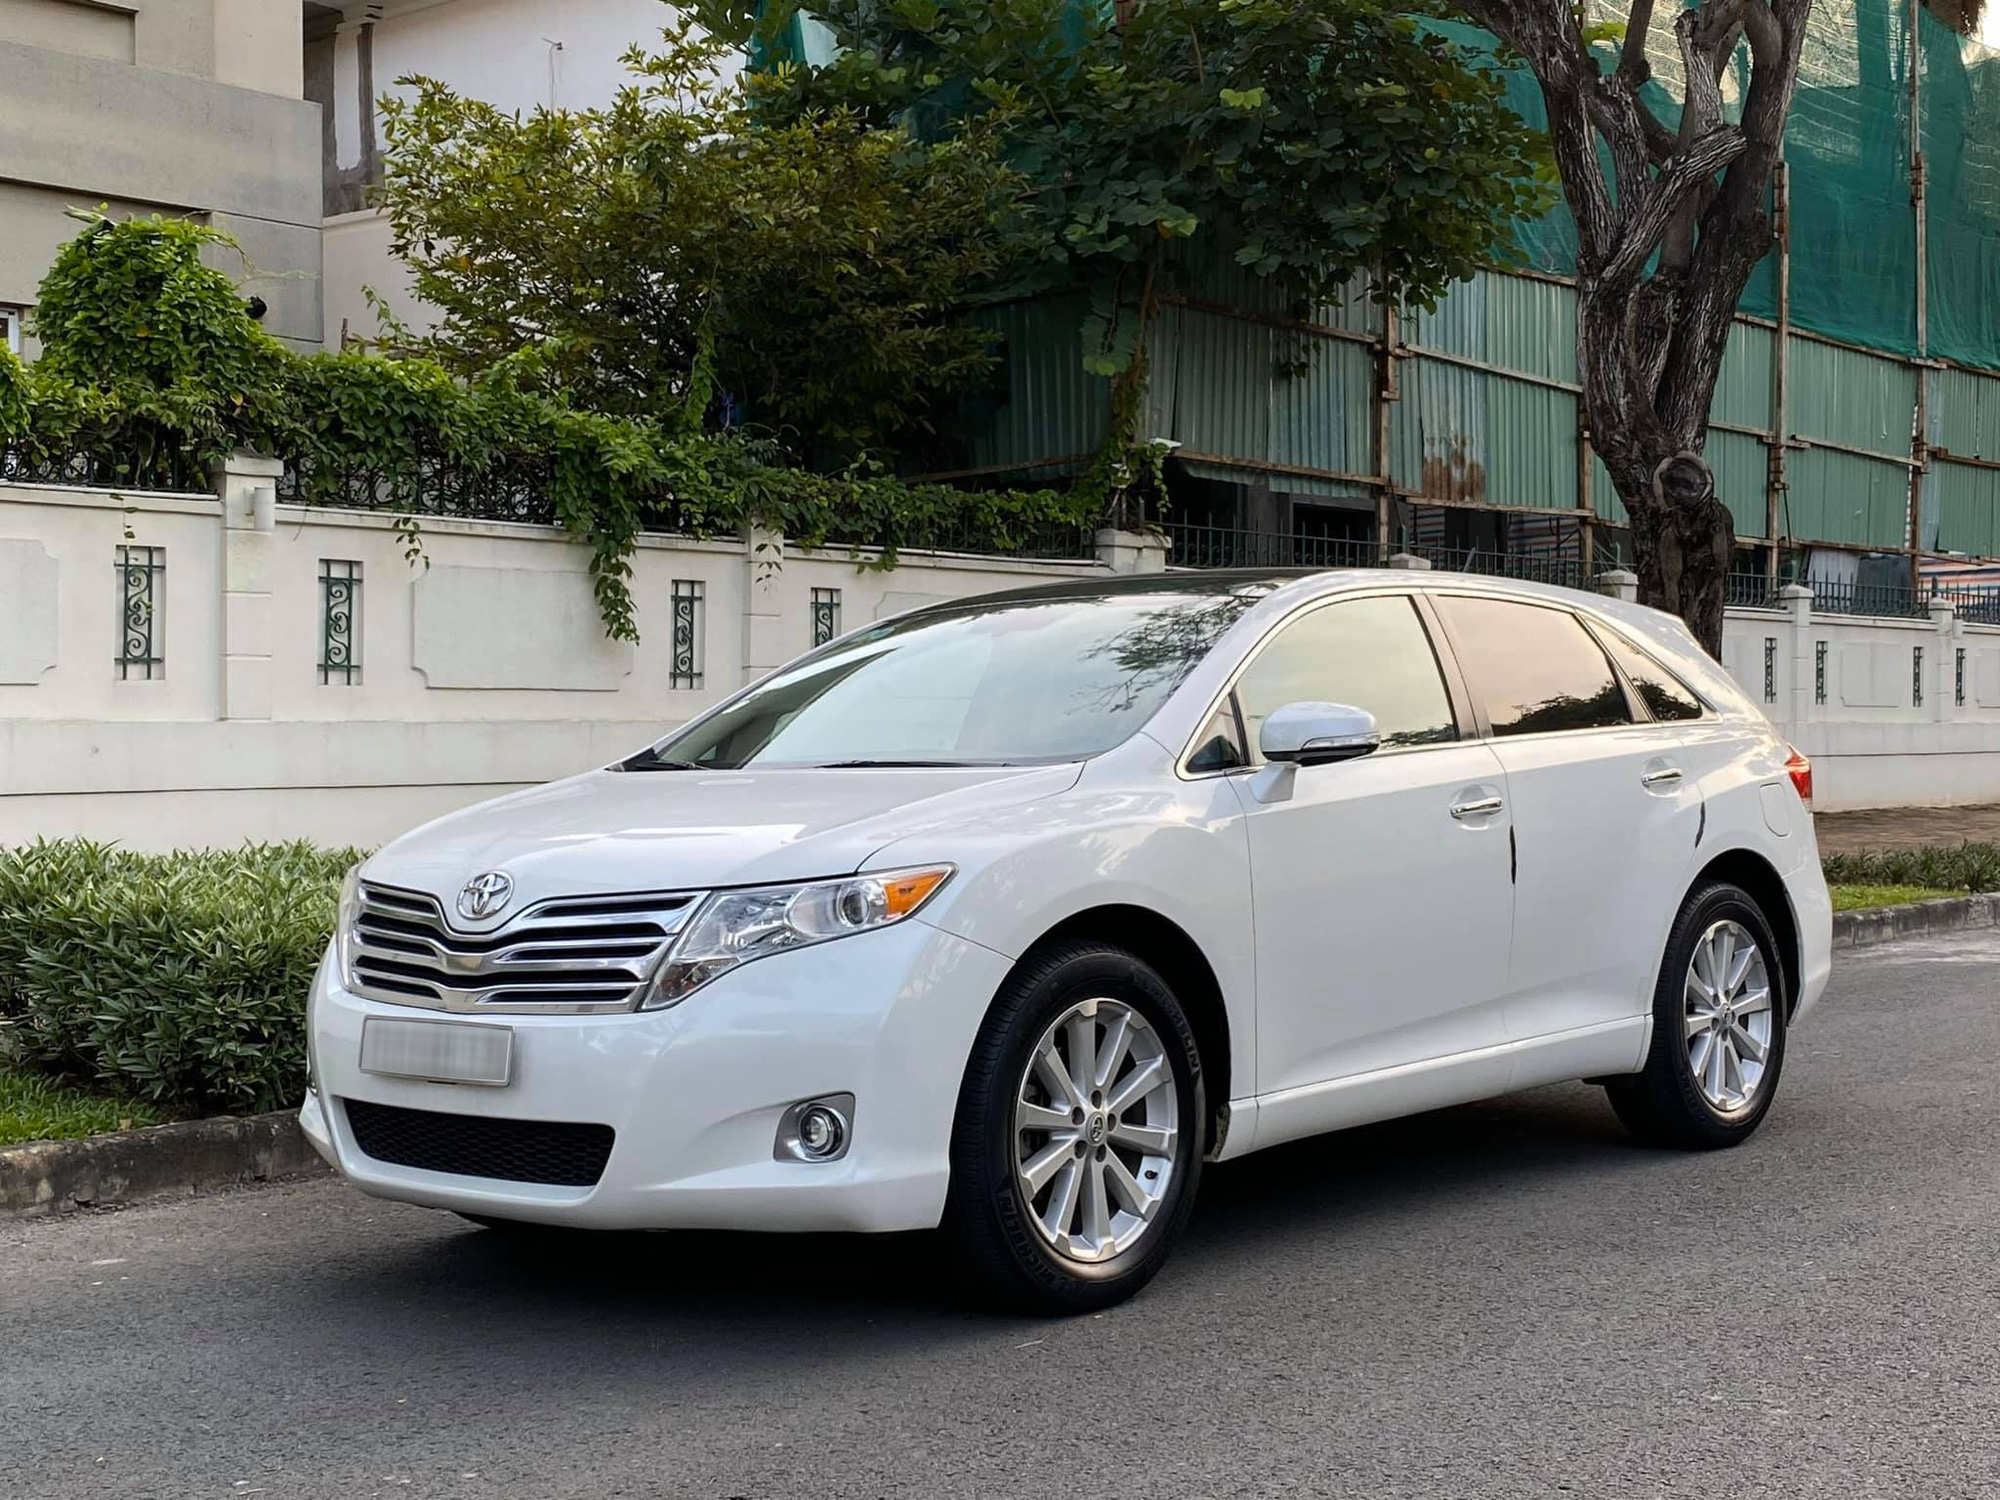 2010 Toyota Venza  News reviews picture galleries and videos  The Car  Guide